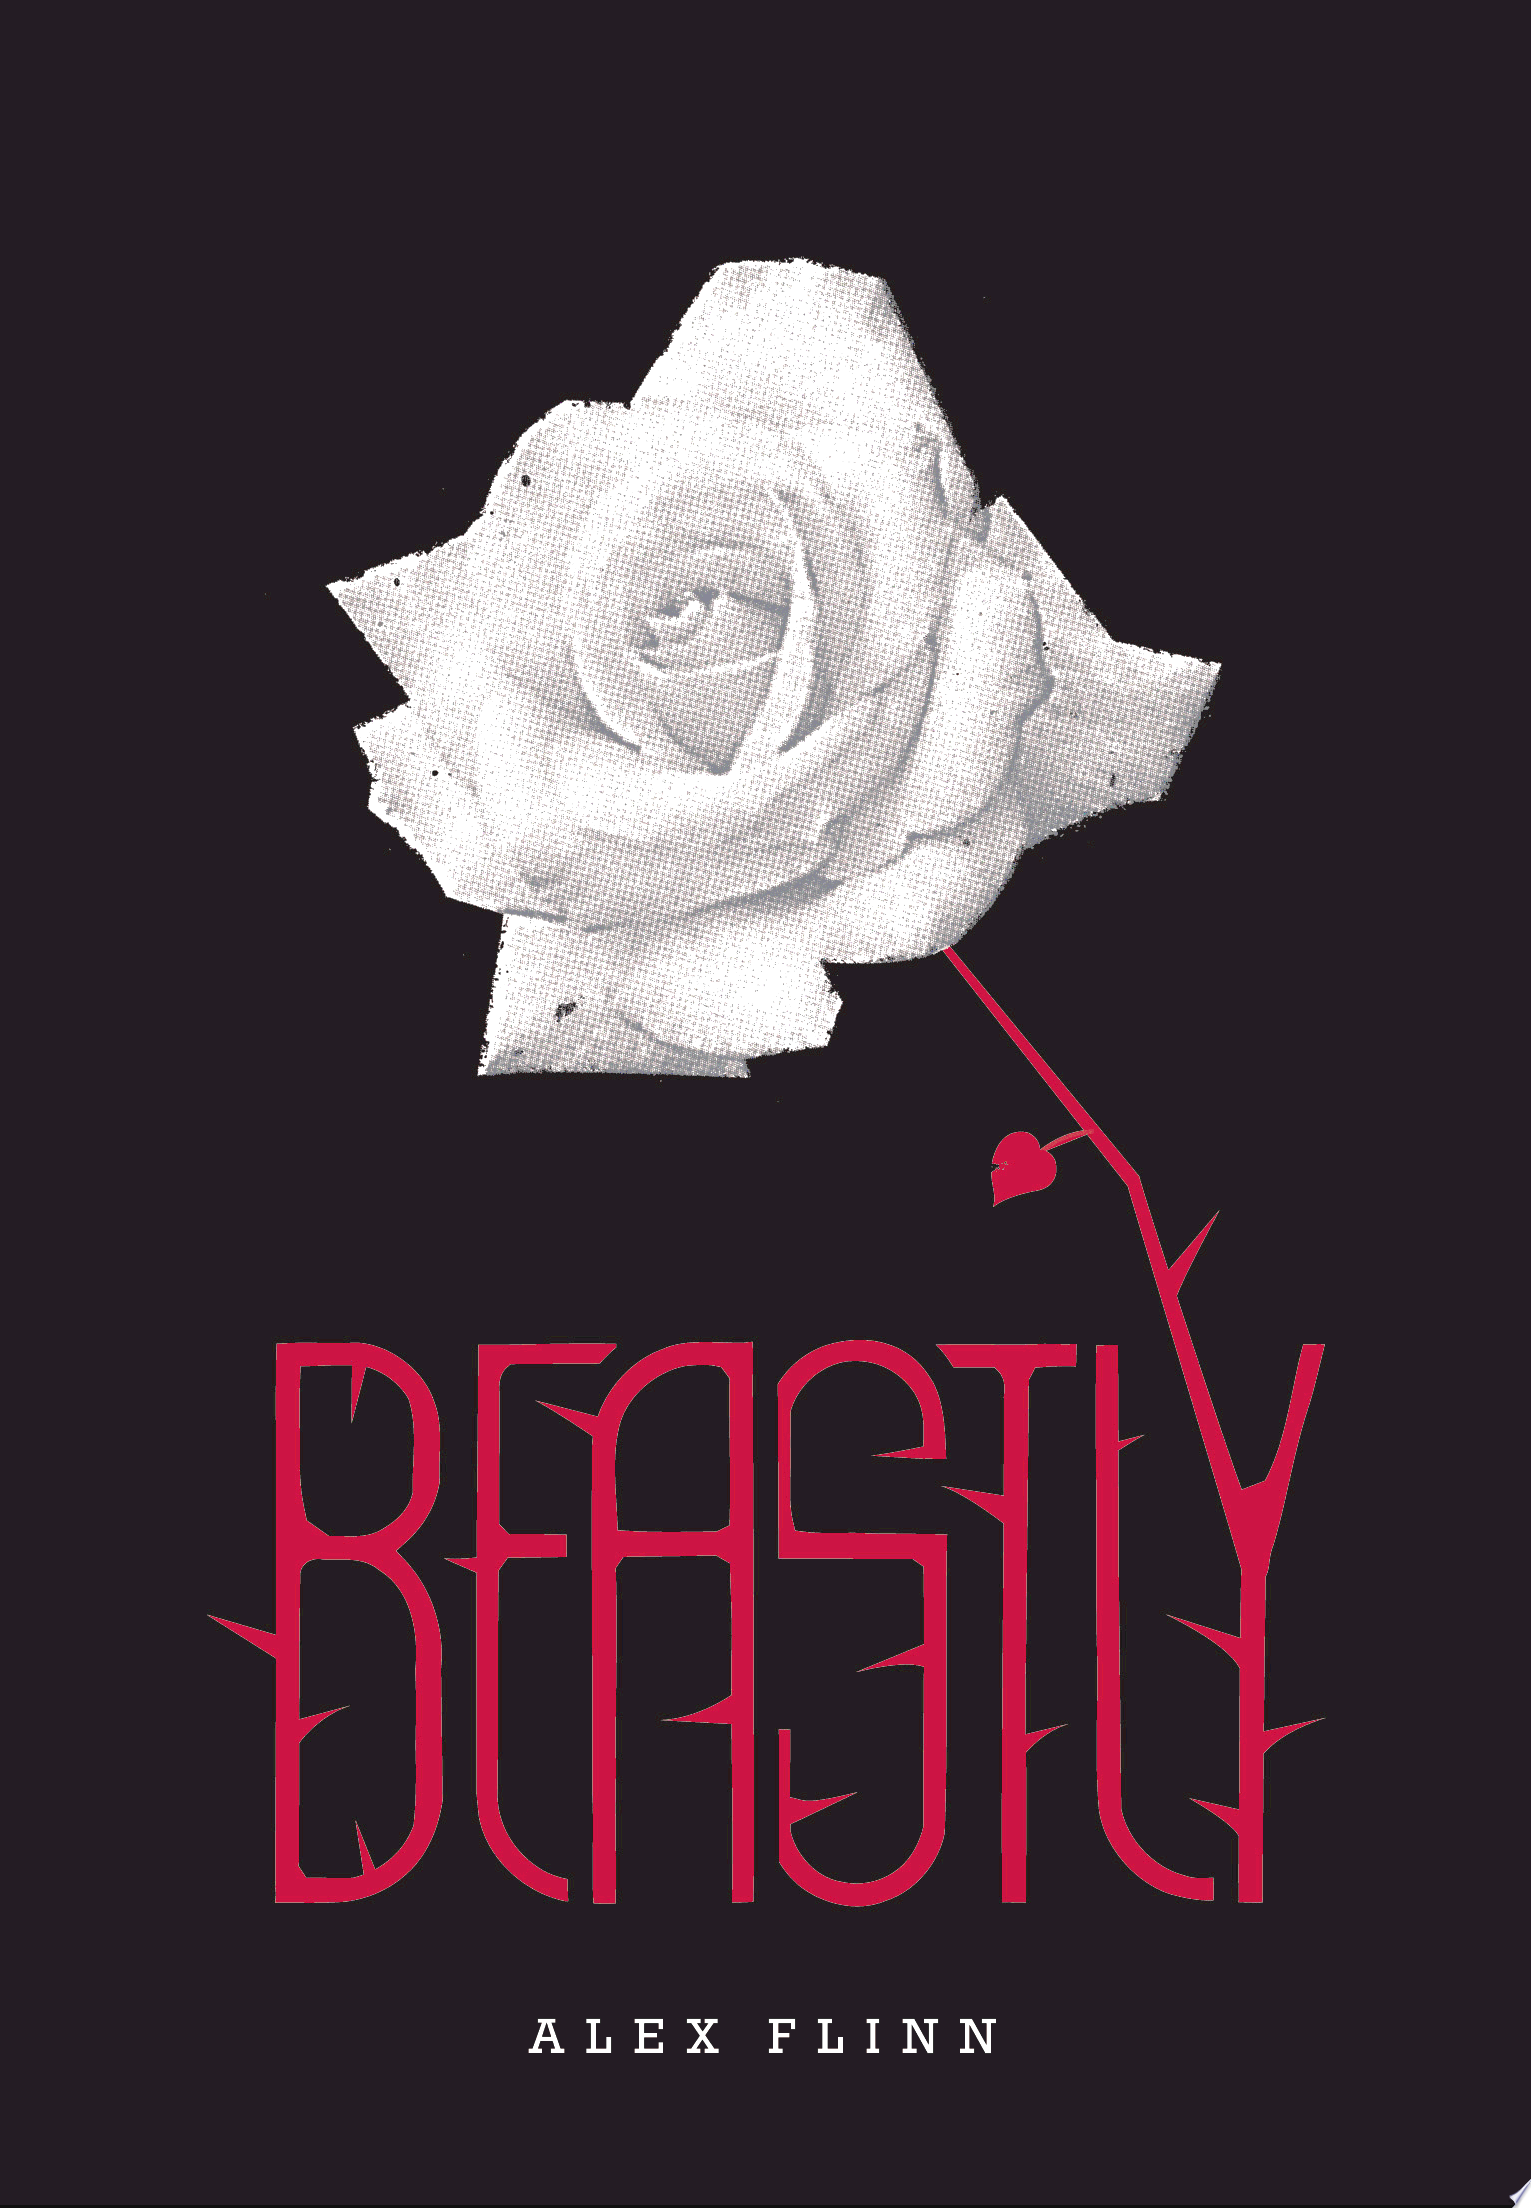 Image for "Beastly"